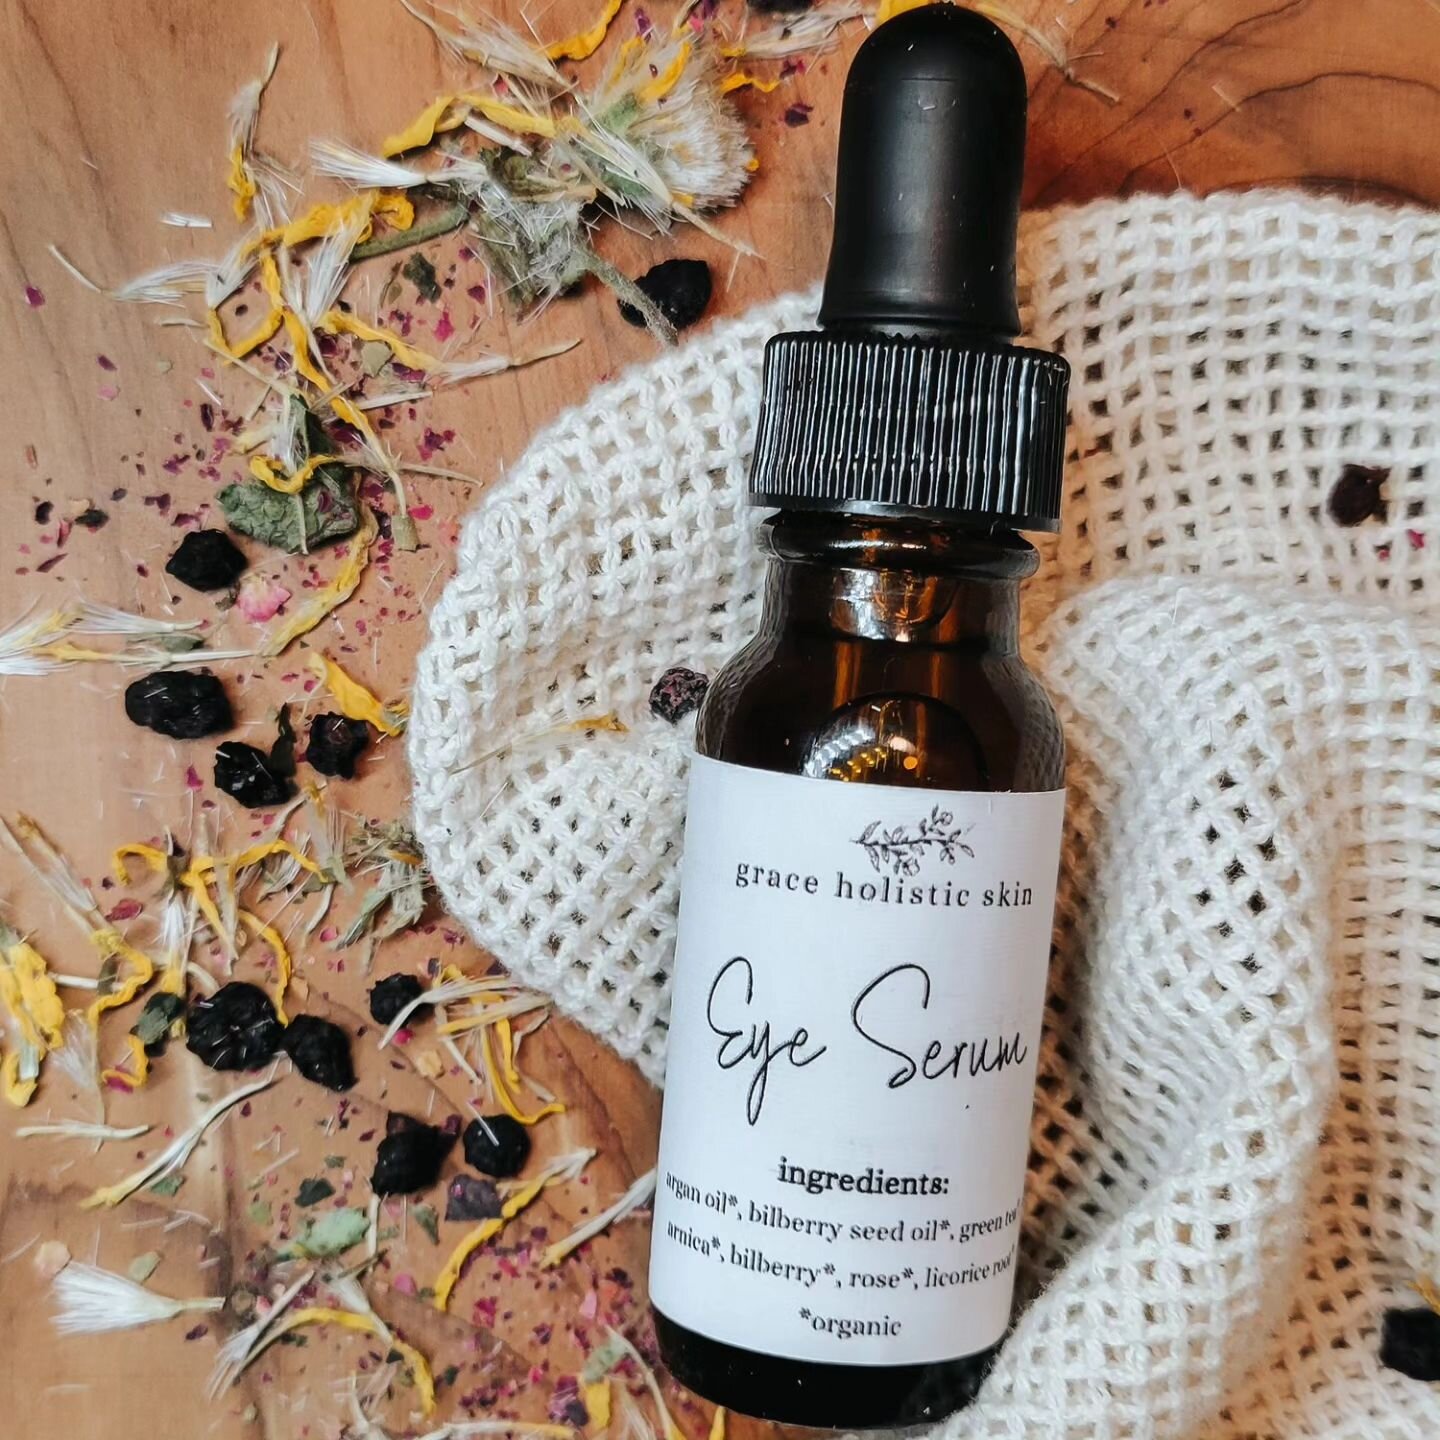 Softening and quickly absorbing argan oil, infused with green tea, arnica, bilberry, licorice root, and rose, combined with bilberry seed oil, make up this beautifully nourishing eye serum. 

It is loaded with antioxidants and nutrients to support th